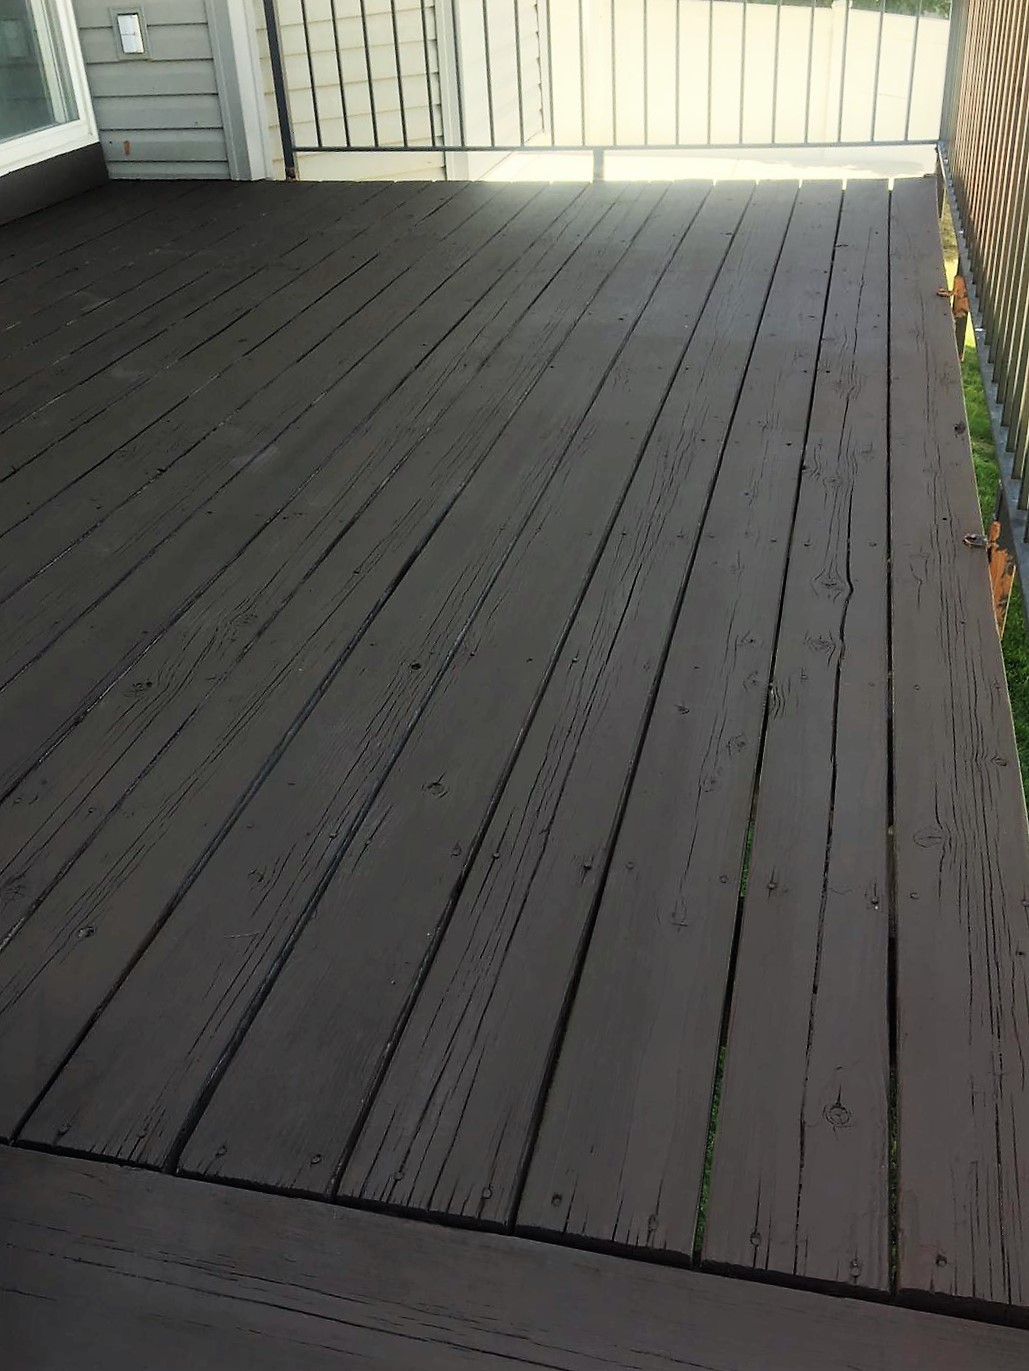 Deck after staining